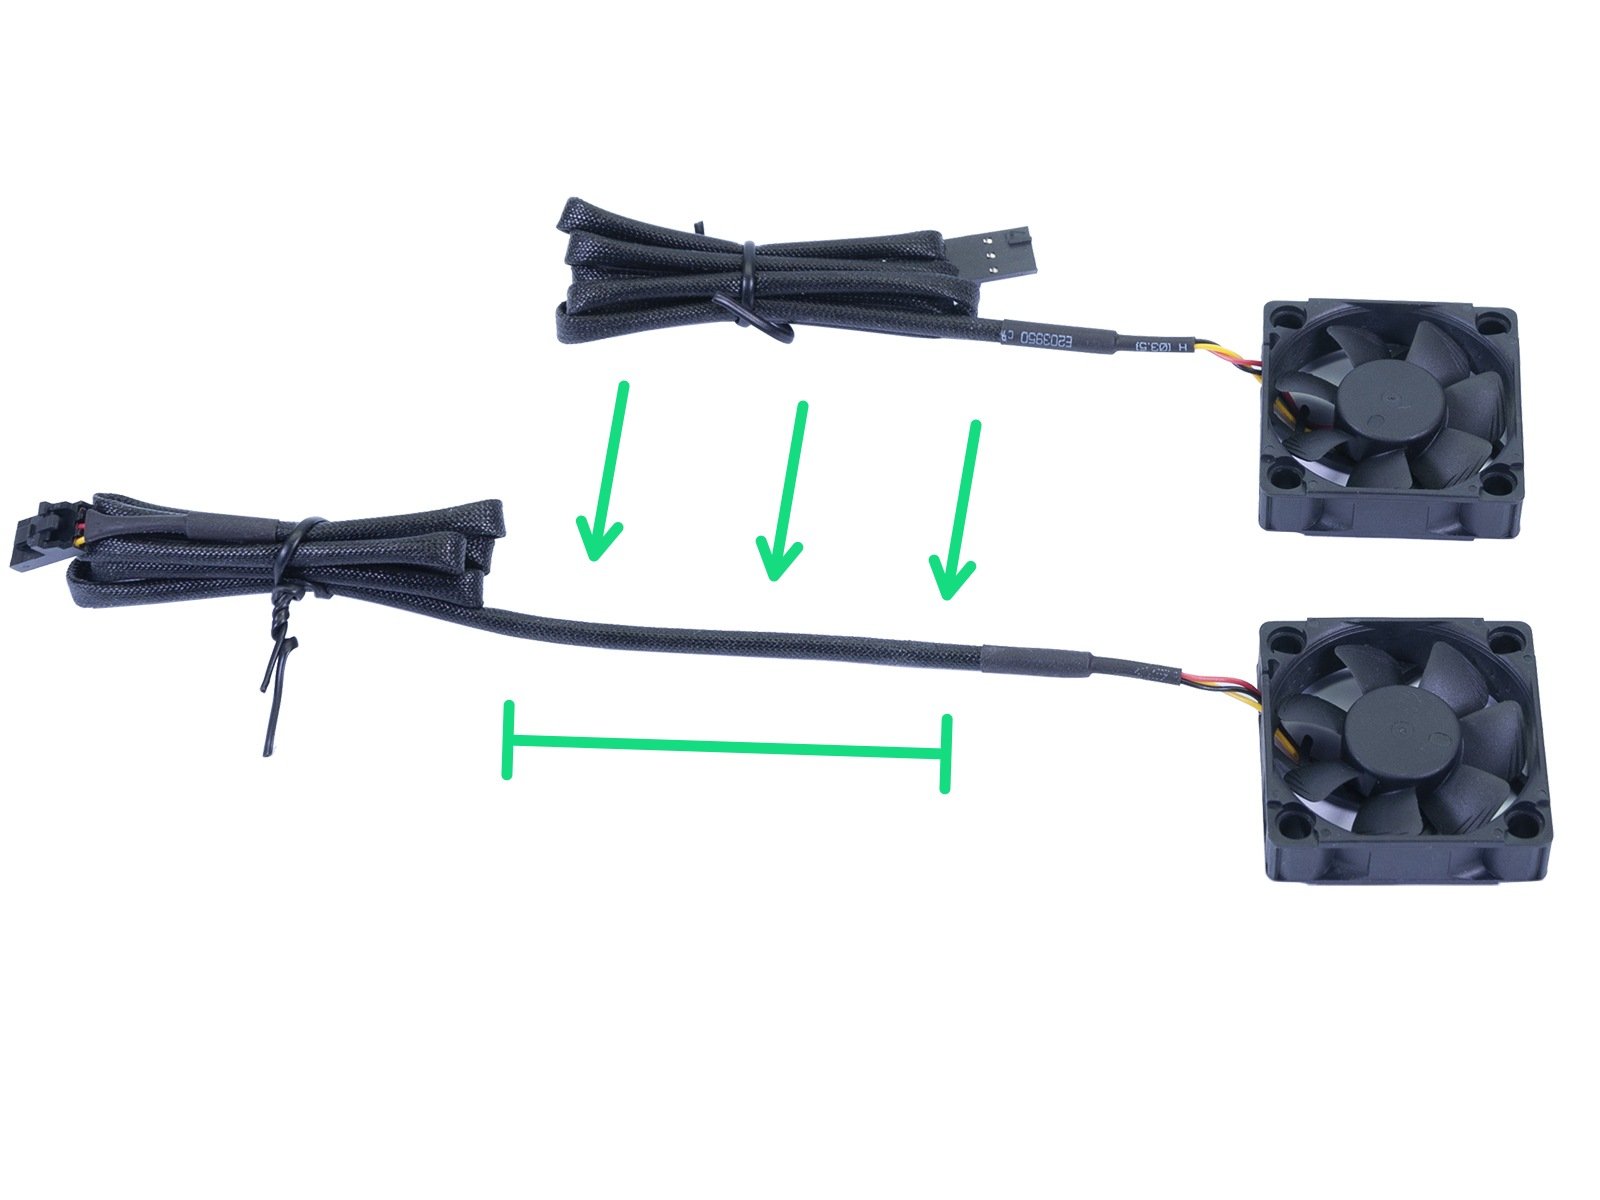 Hotend fan cable adjustment (version A)